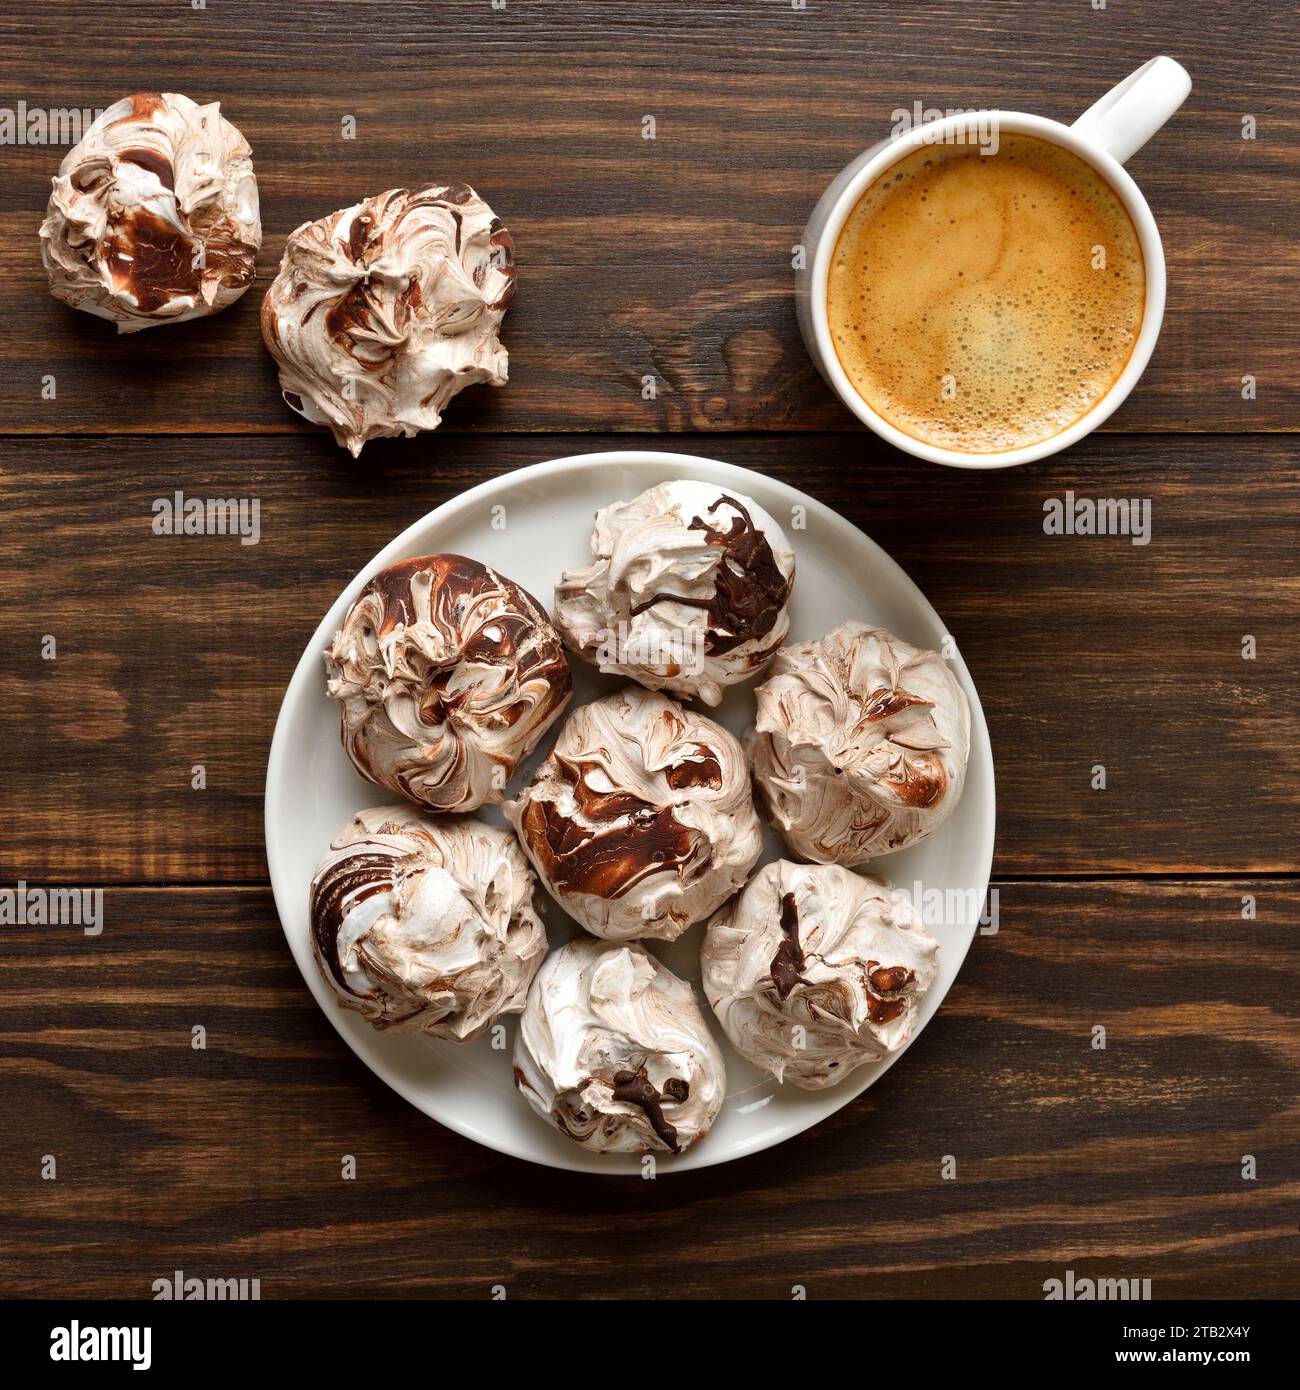 Chocolate meringue cookies and cup of coffee over wooden background. Top view, flat lay Stock Photo